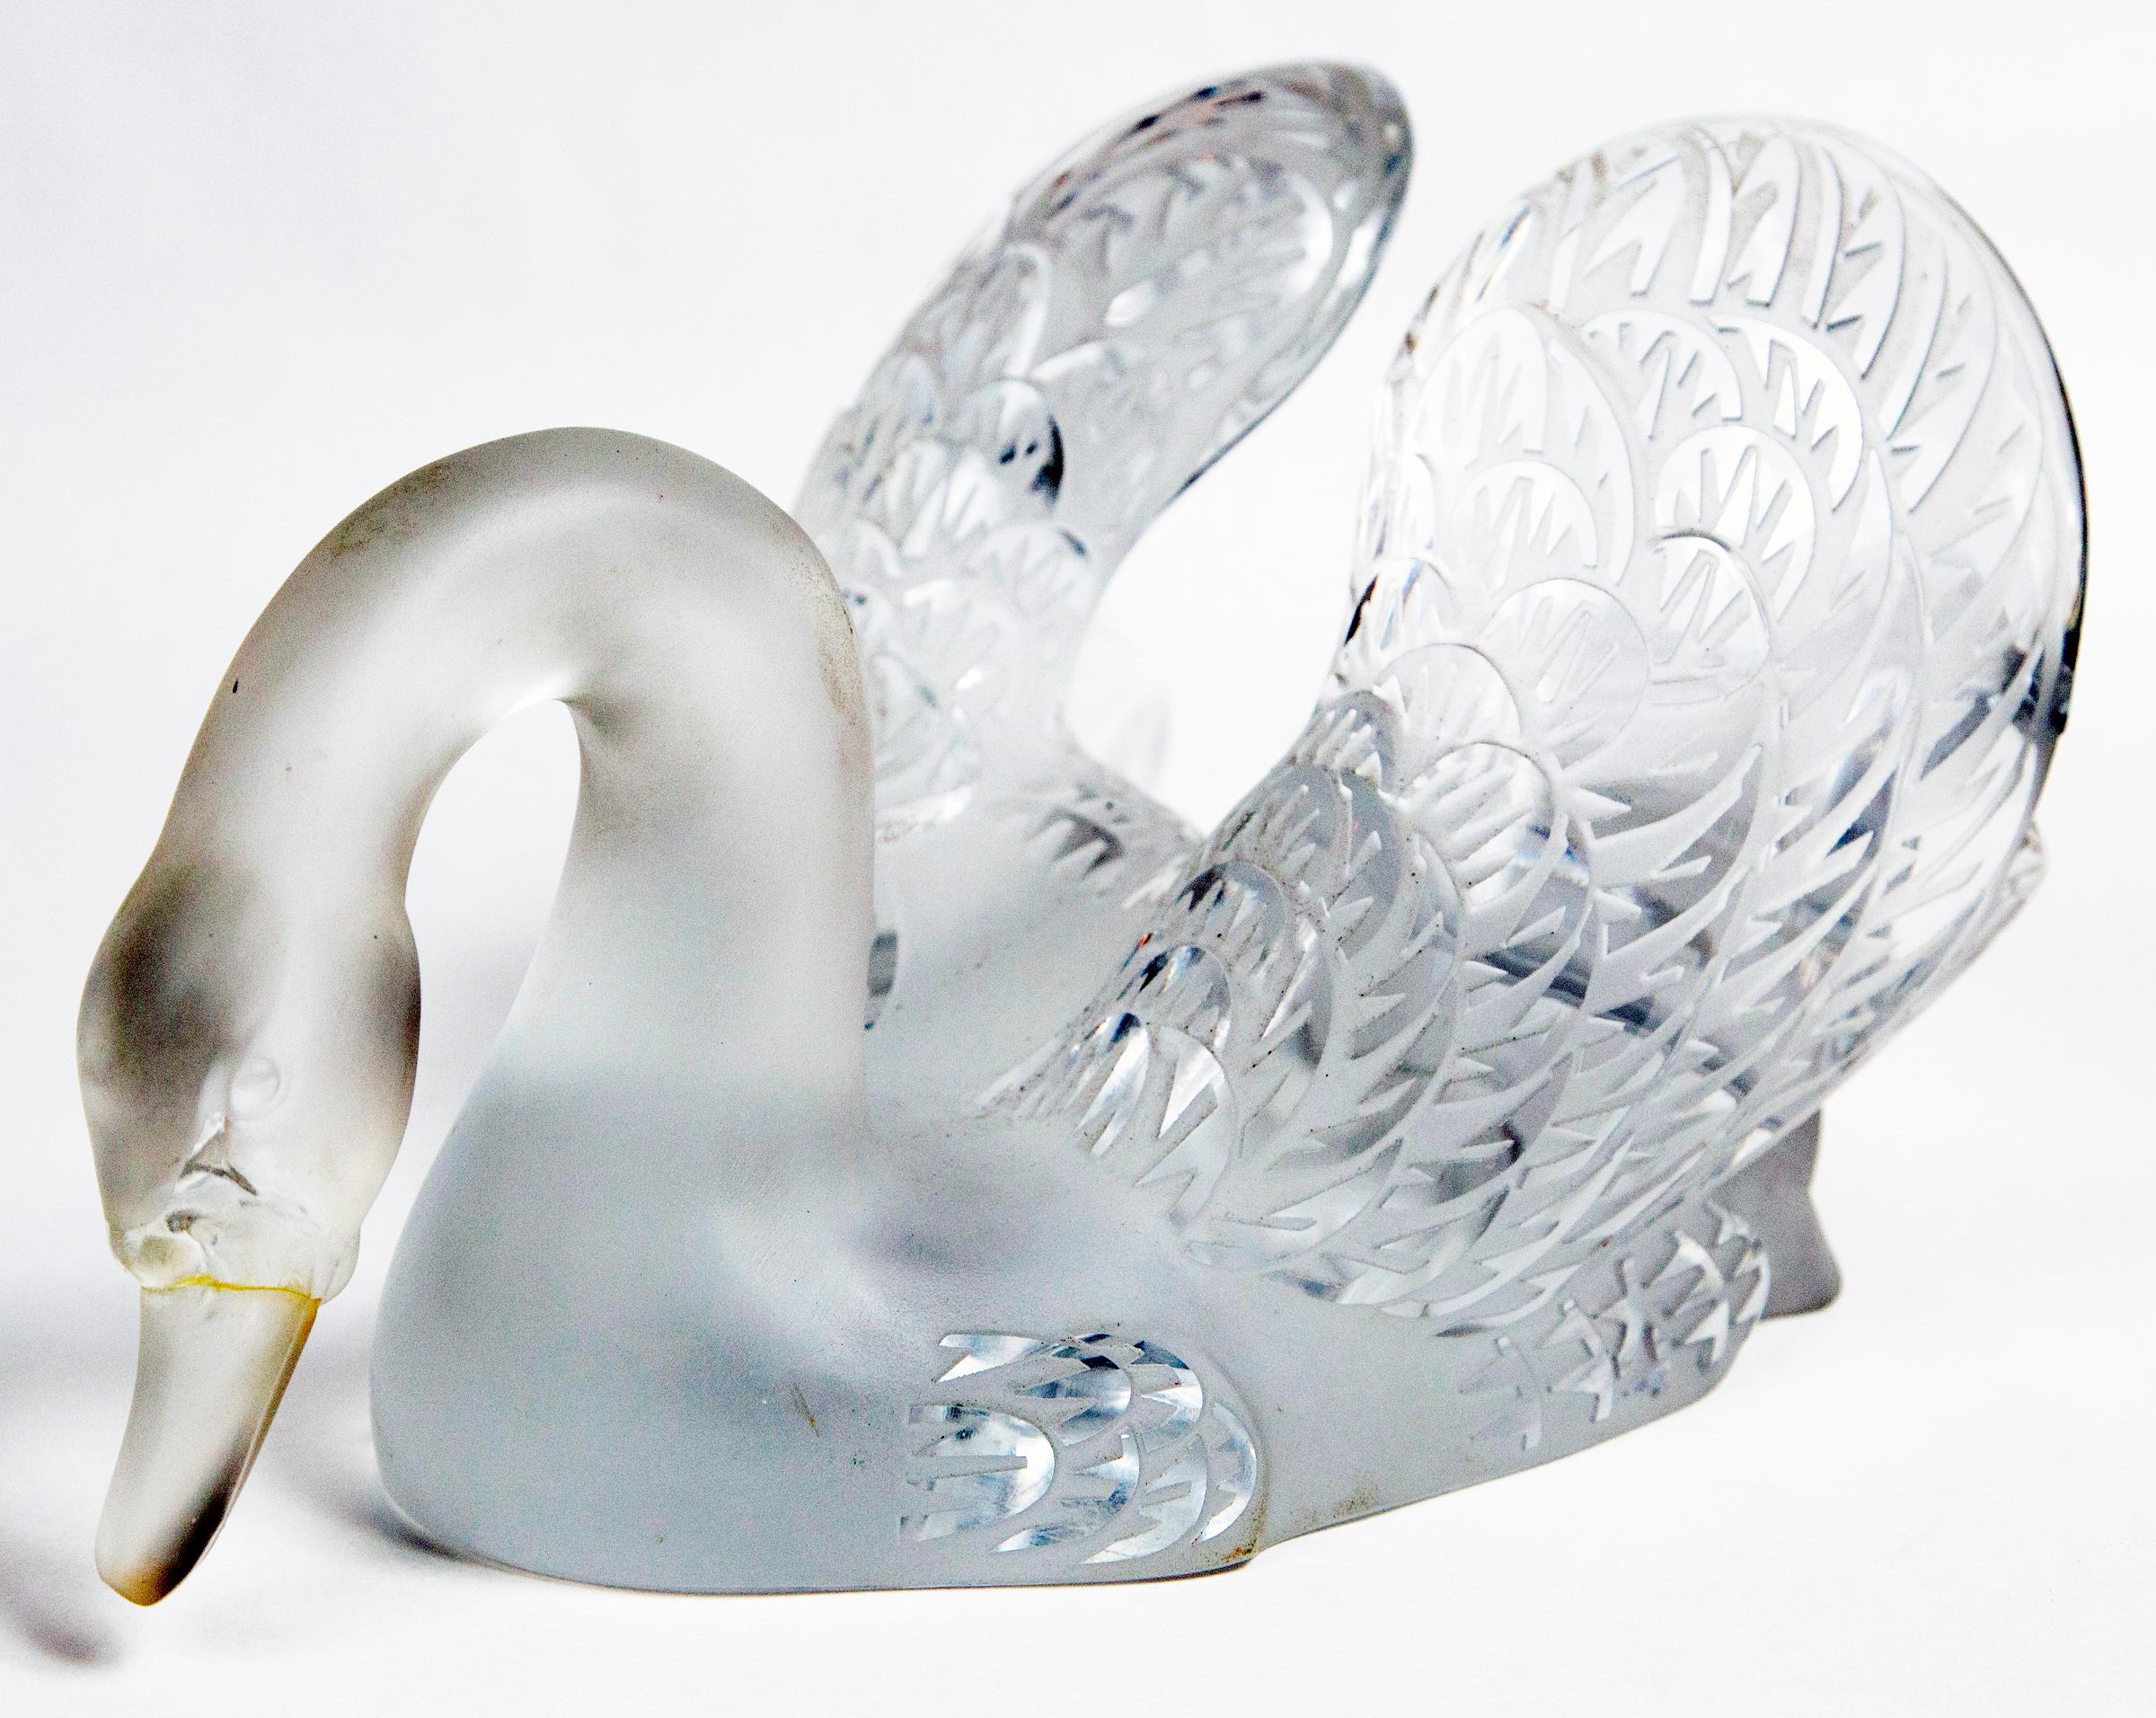 Frosted and clear crystal of a swan with head down, wings proudly displayed.
Signed Lalique Paris in script on the bottom edge of the tail. shown in photo 9 just above the dark cloth placed so that it is more visible. The signature is on the curve